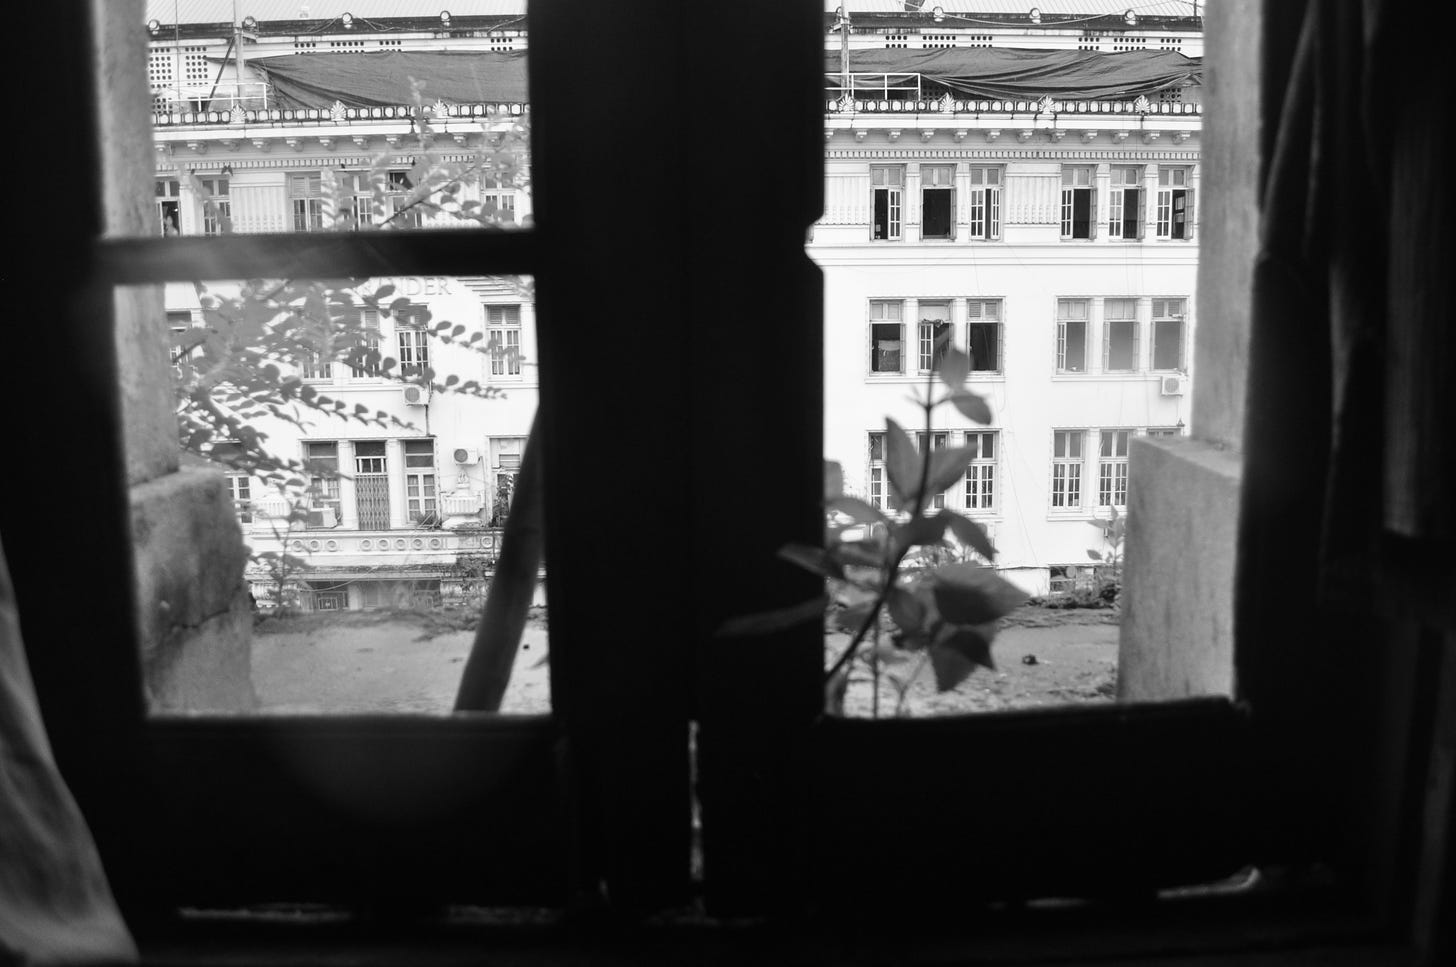 Black and white shot through a window looking out on the street in Yangon.